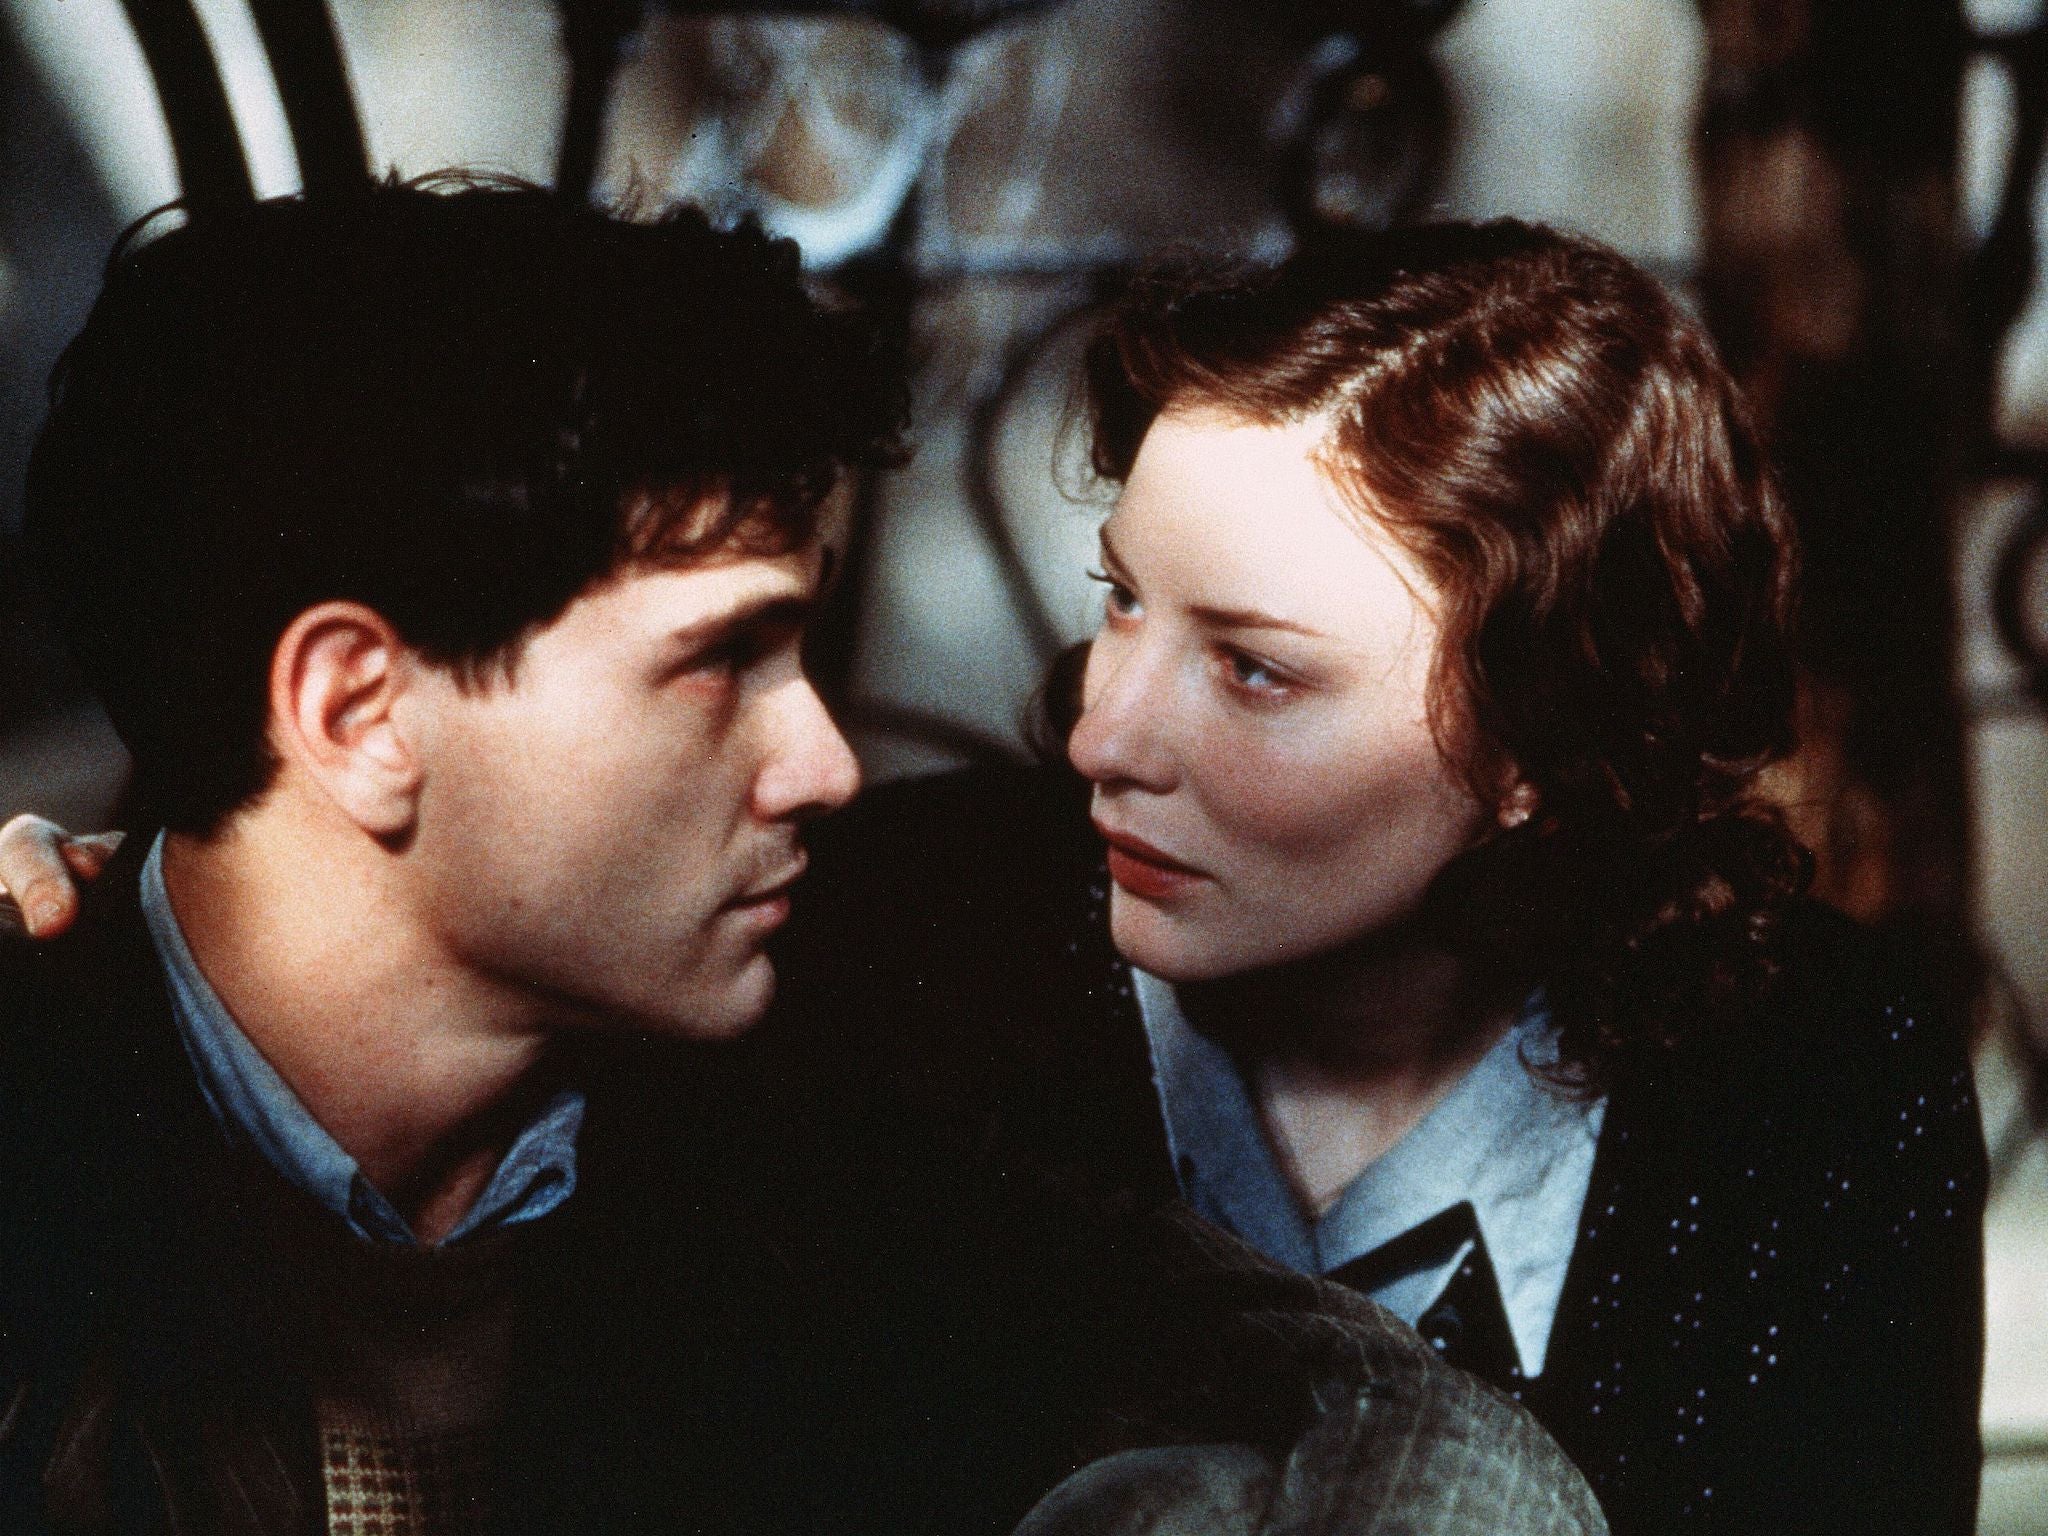 Cate Blanchett and Billy Crudup star in ‘Charlotte Gray’ (2001)